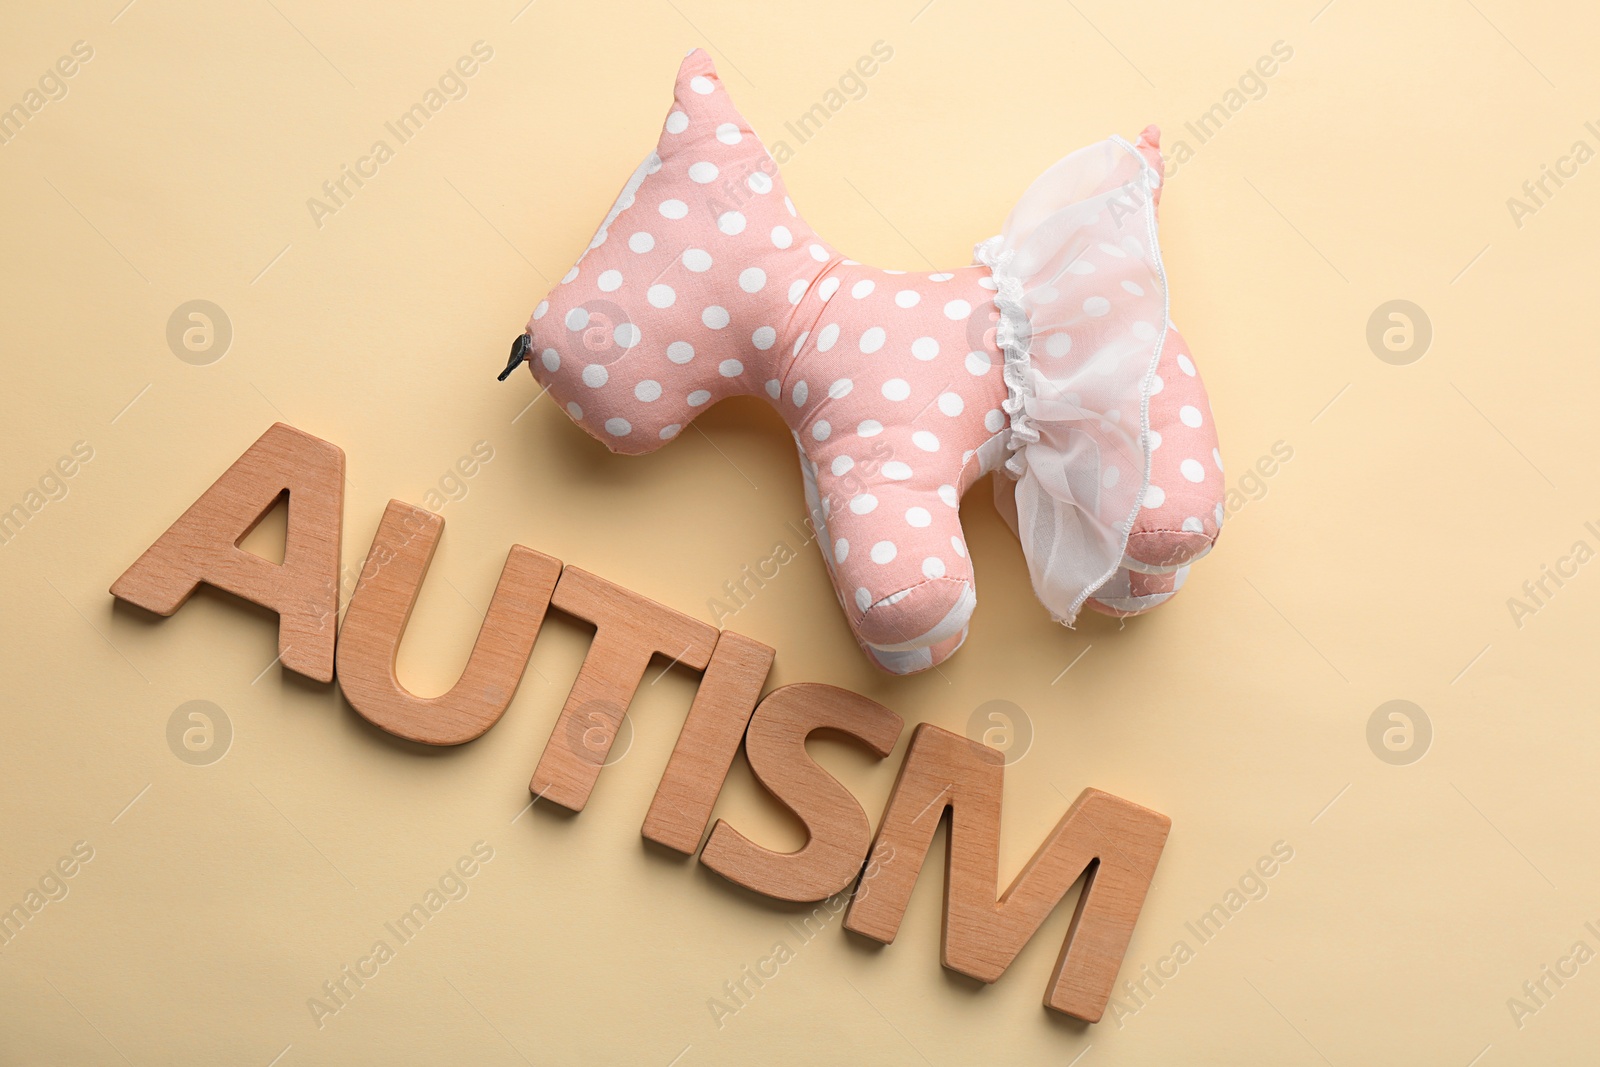 Photo of Word "Autism" and toy on color background